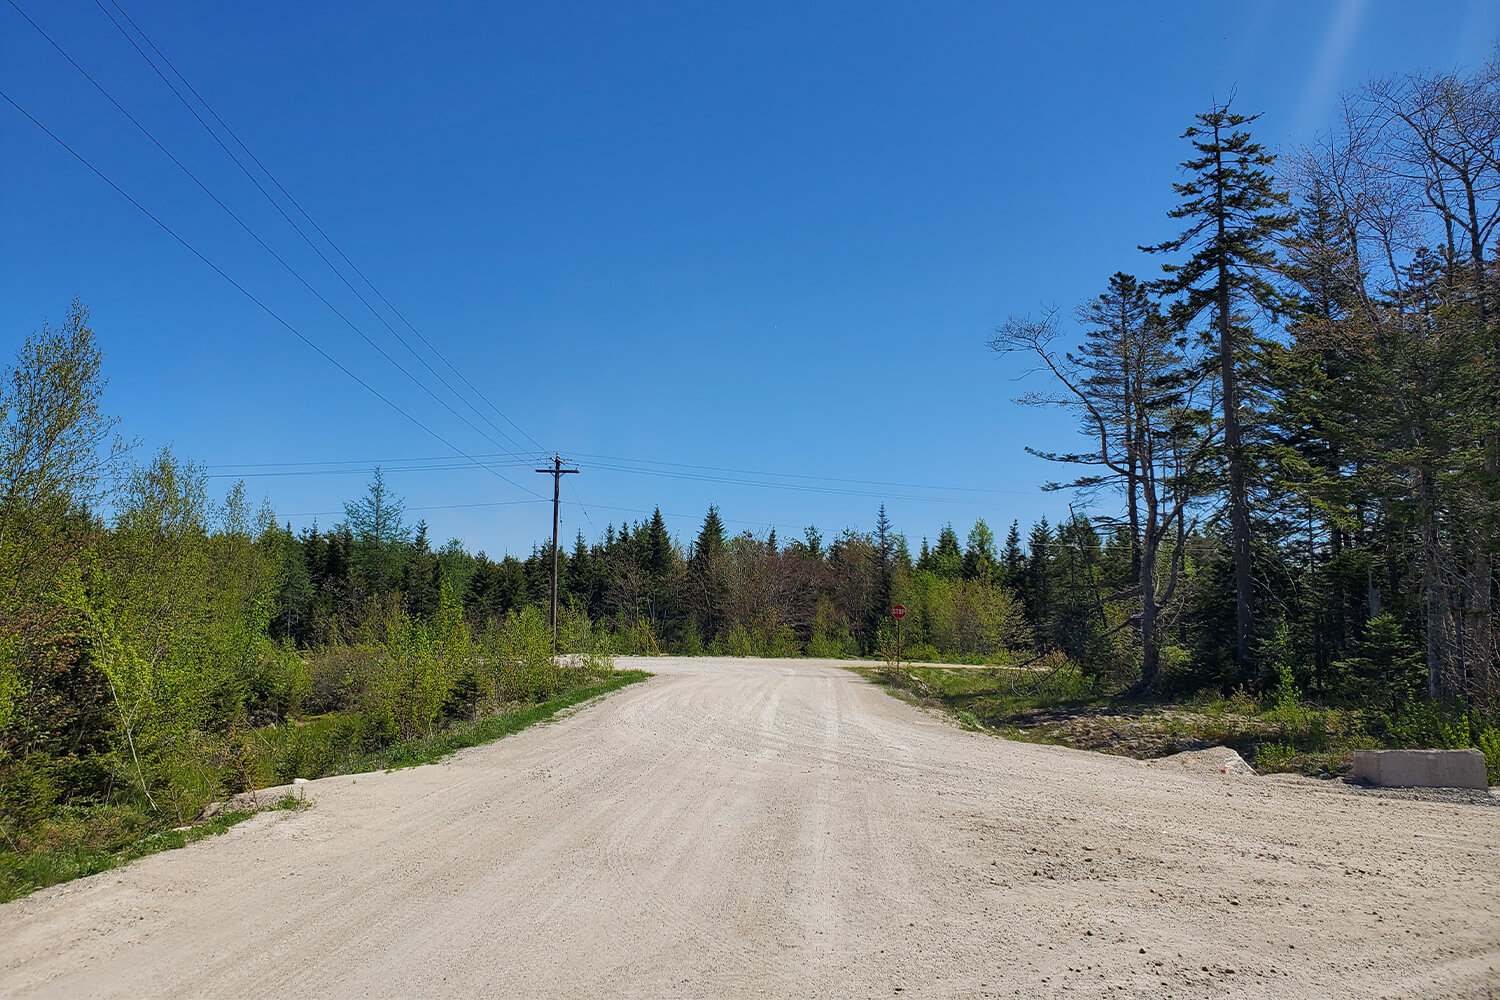 The graded, gravel road that leads to the main public road